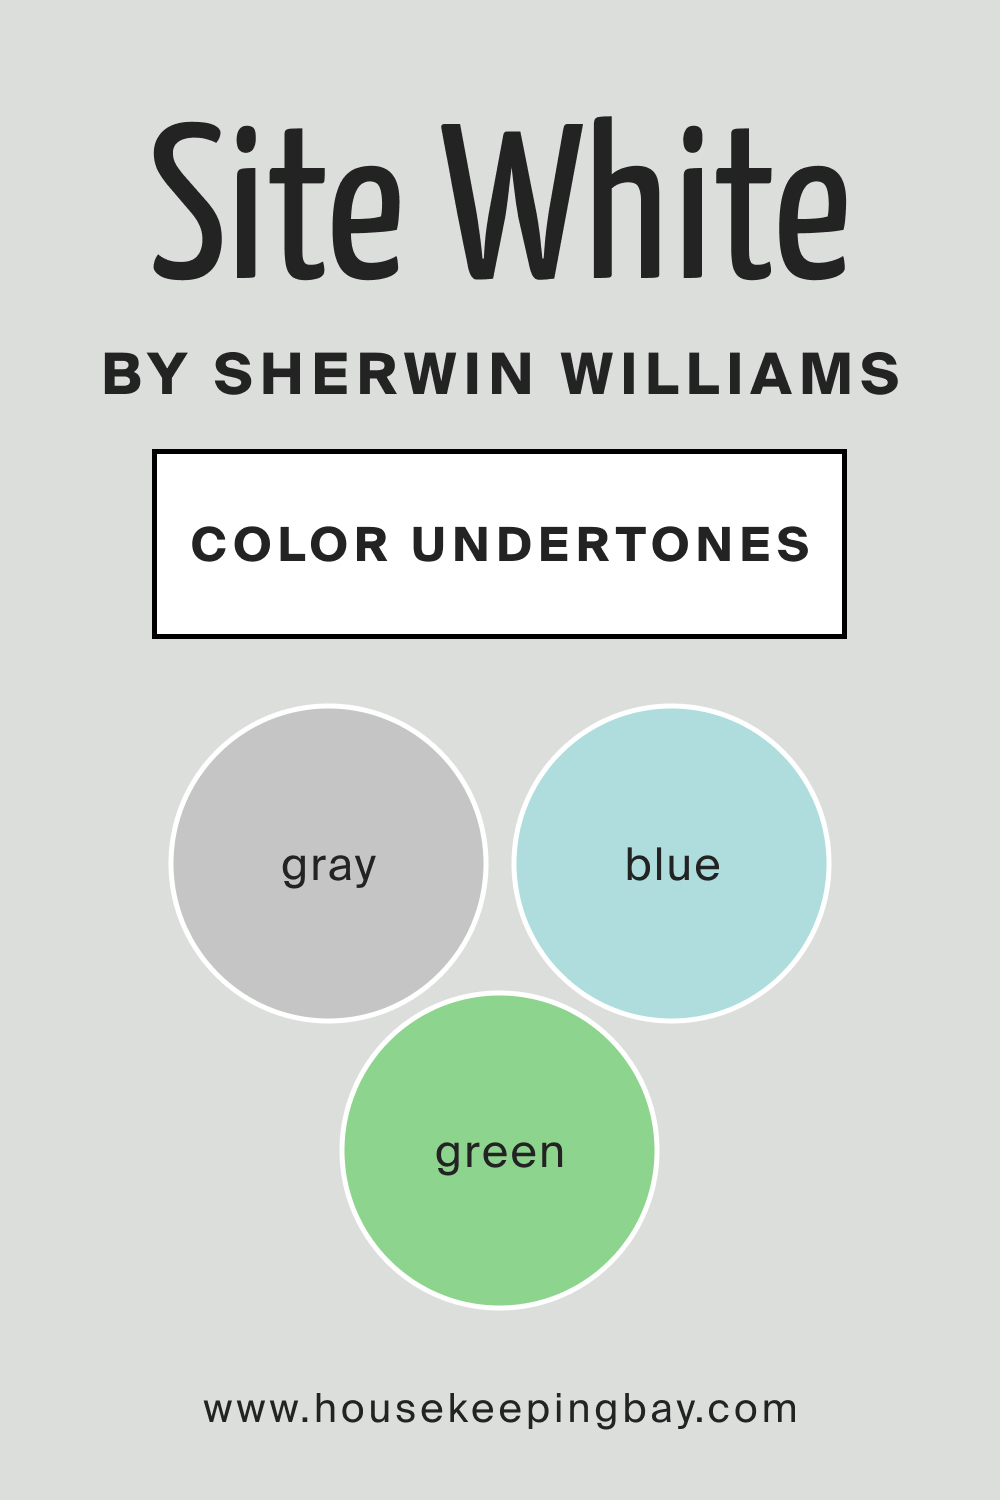 SW Site White by Sherwin Williams Main Color Undertone